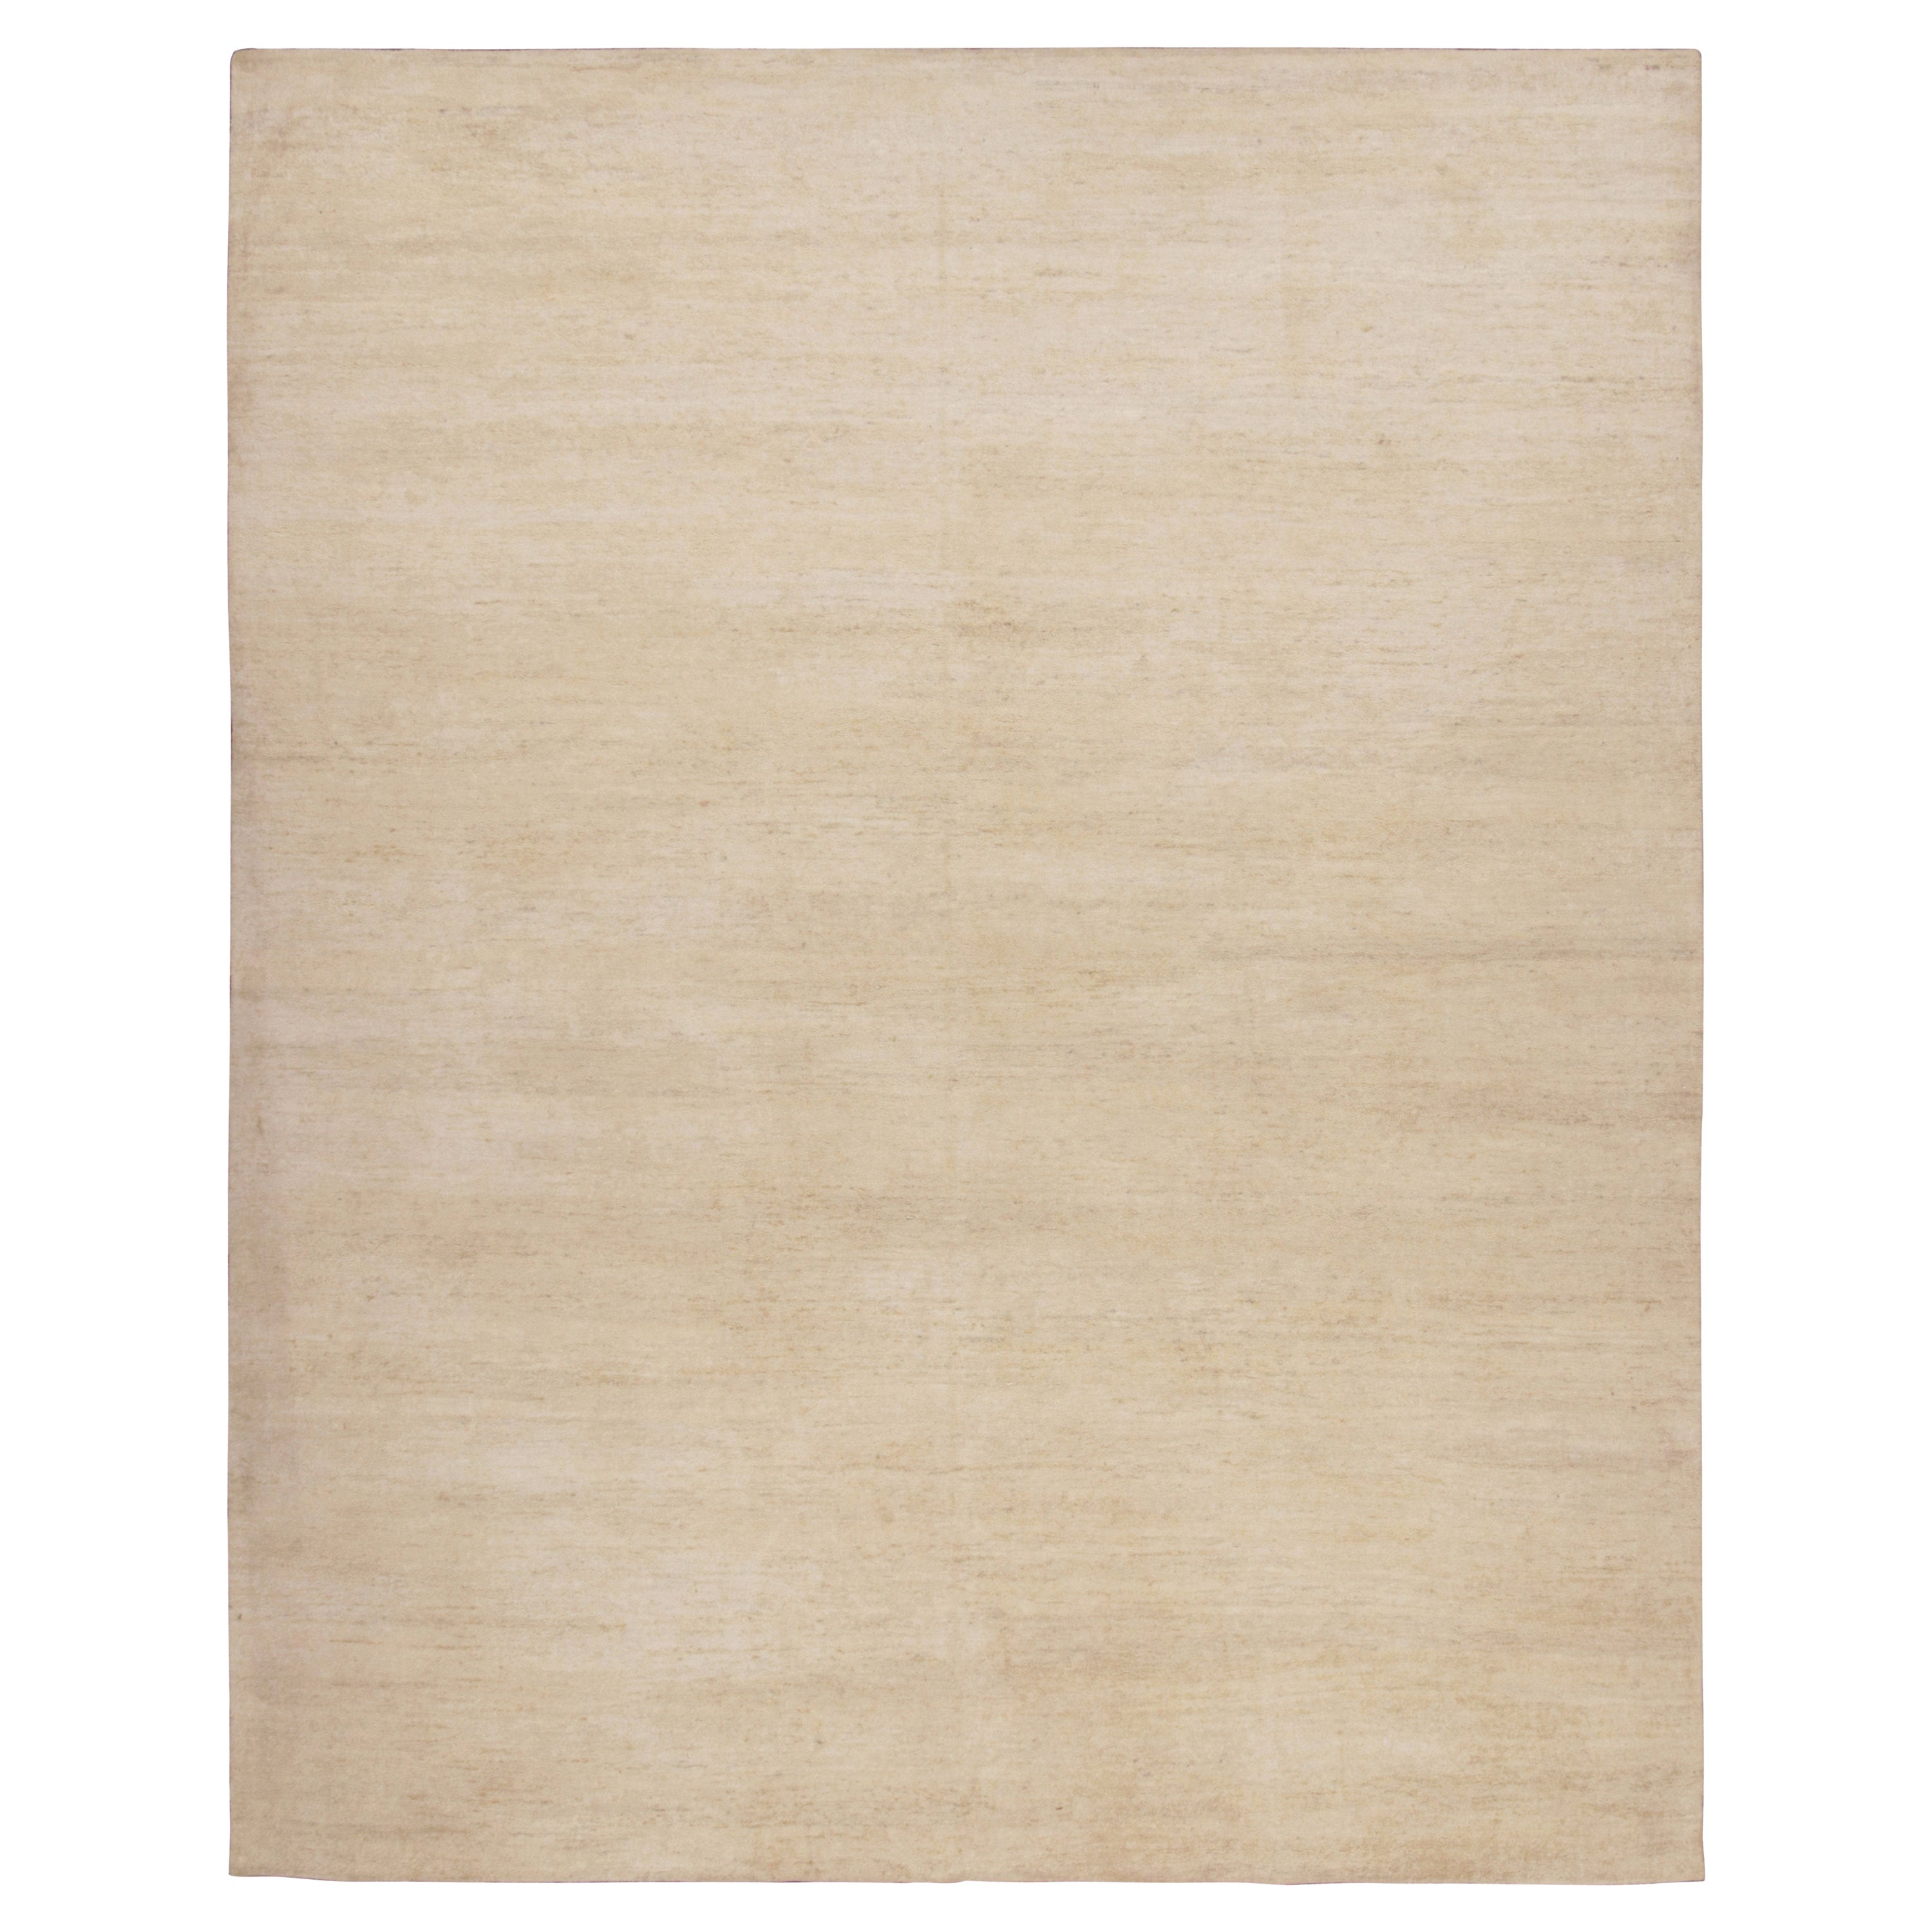 Rug & Kilim's Modern Textural Oversized Rug With Striae of Beige